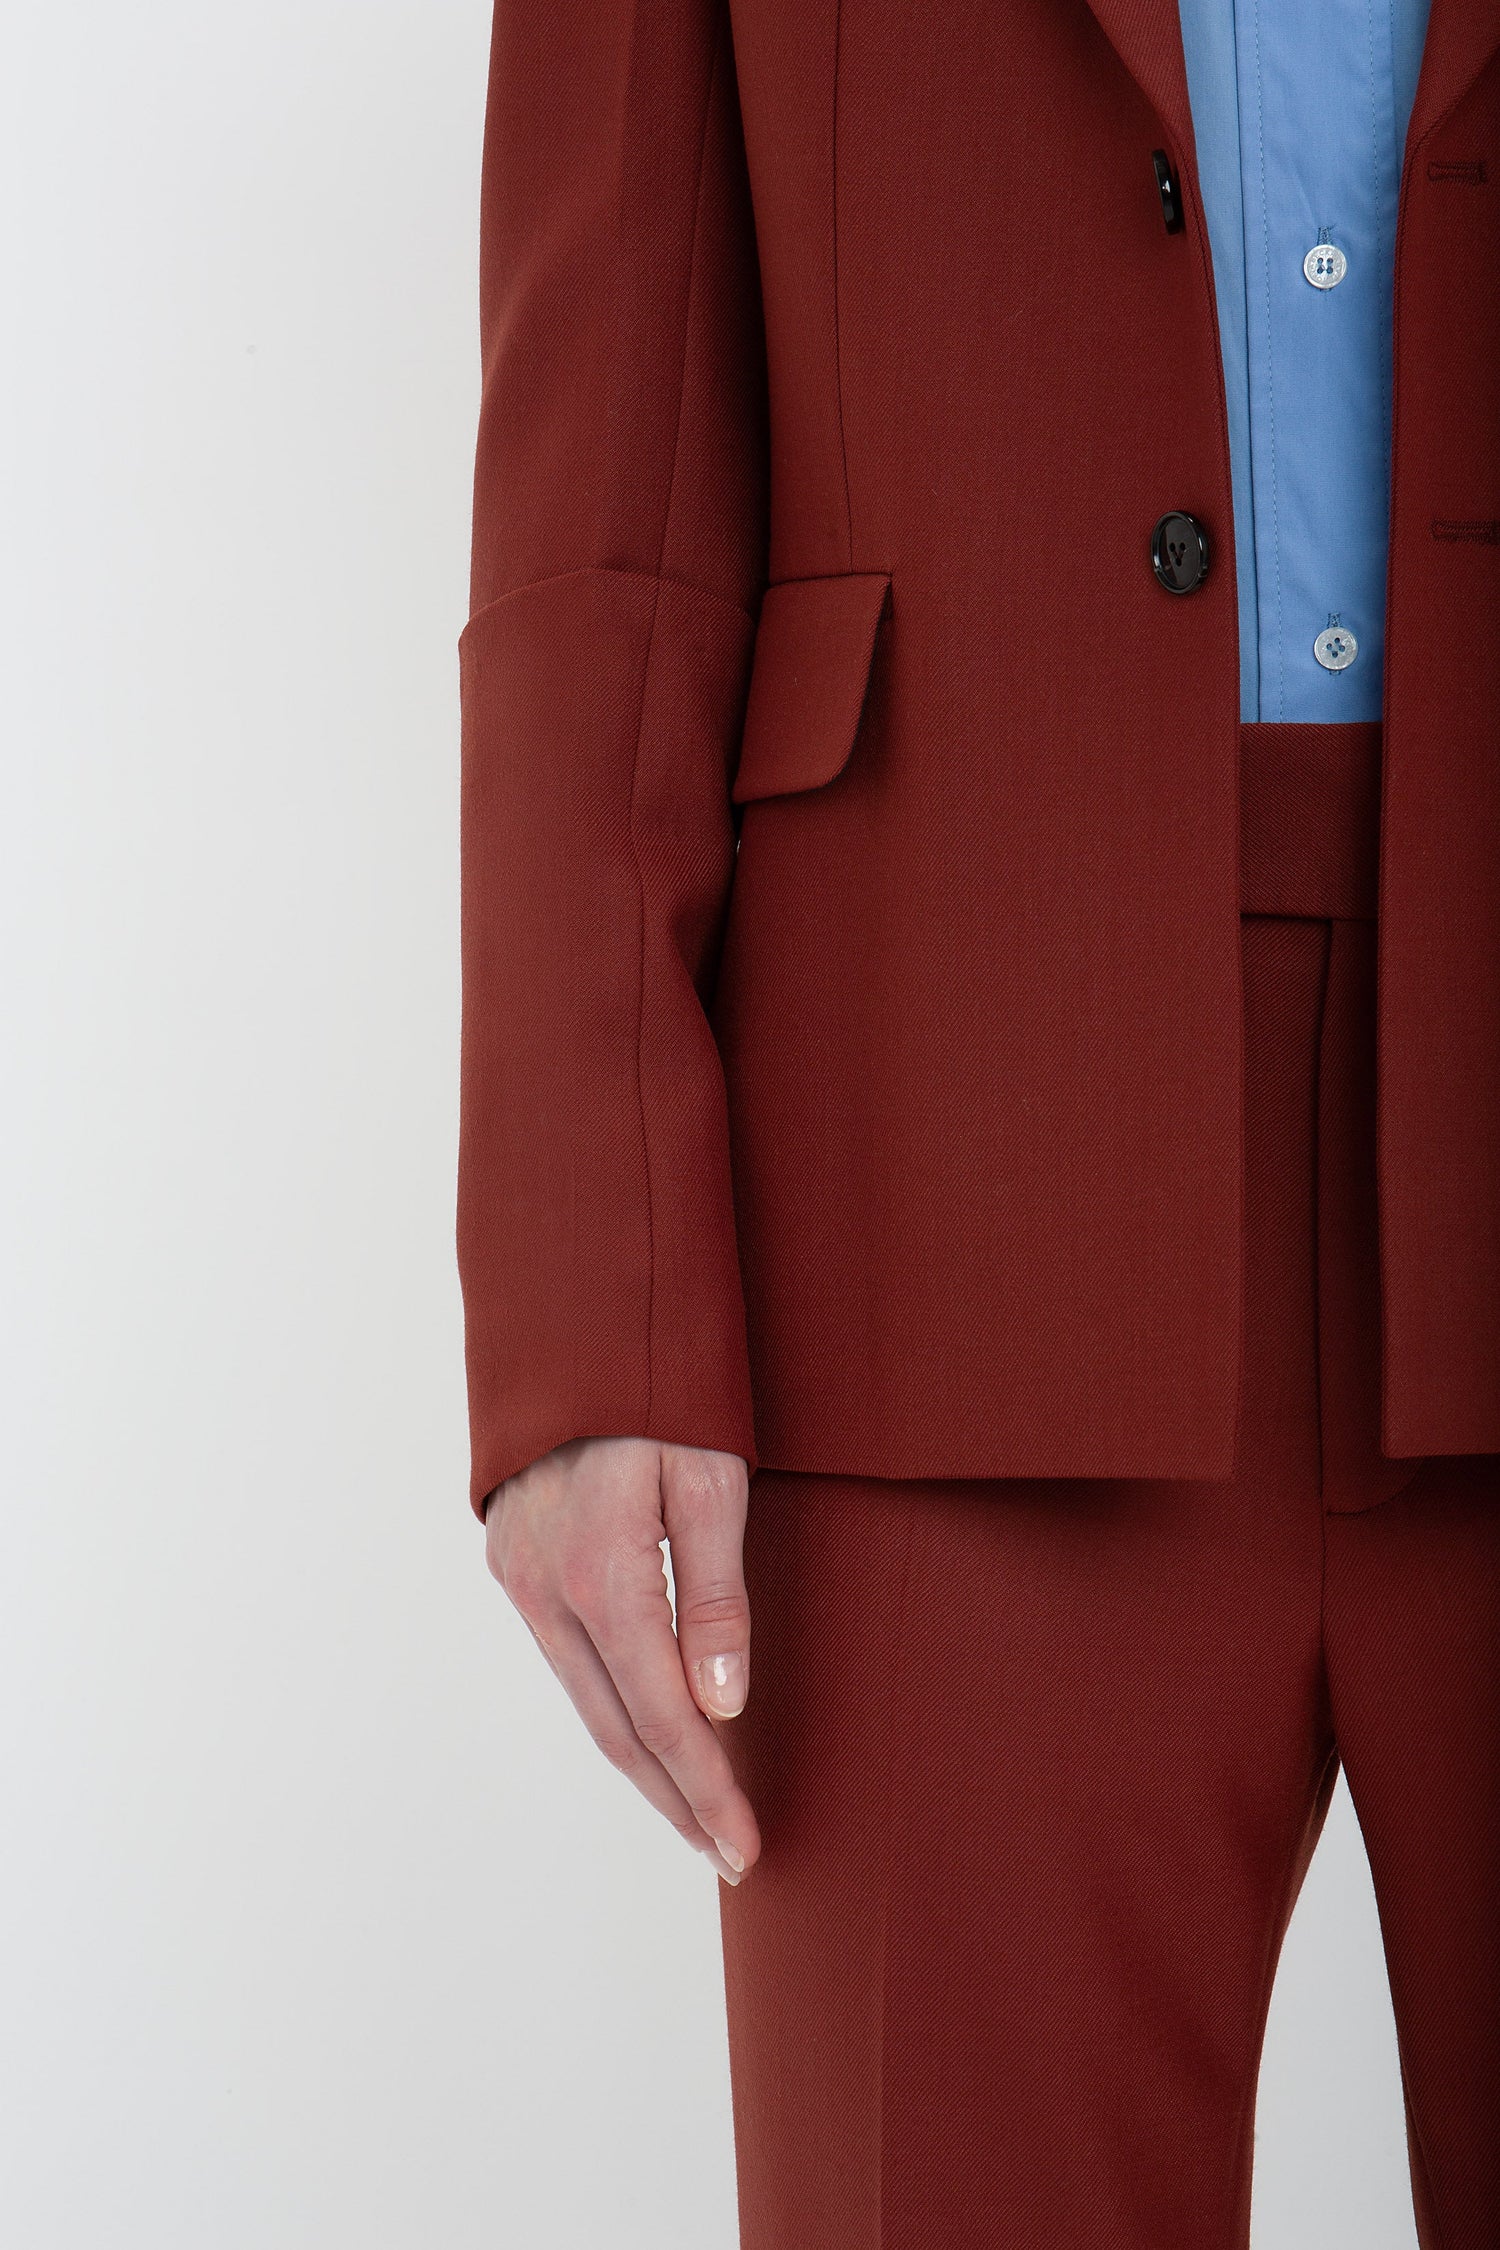 Person wearing a Victoria Beckham Sleeve Detail Patch Pocket Jacket In Russet with contemporary detailing, paired with a blue shirt. They show their left arm and a portion of their torso, focusing on the lower half of the jacket and part of the pants.